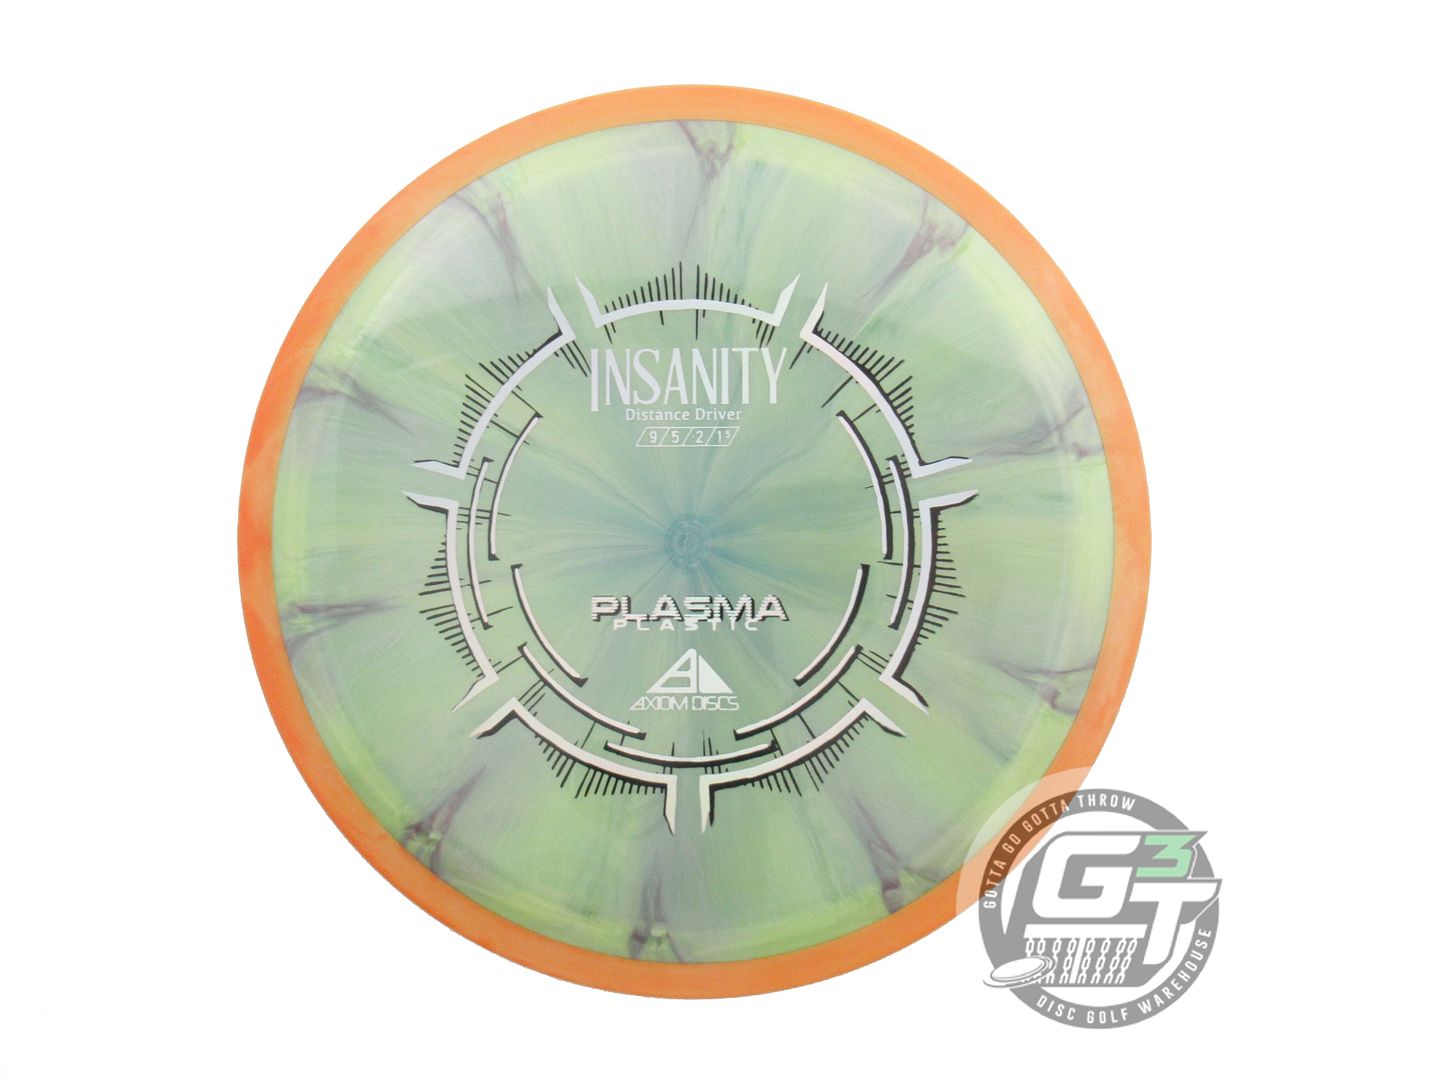 Axiom Plasma Insanity Distance Driver Golf Disc (Individually Listed)